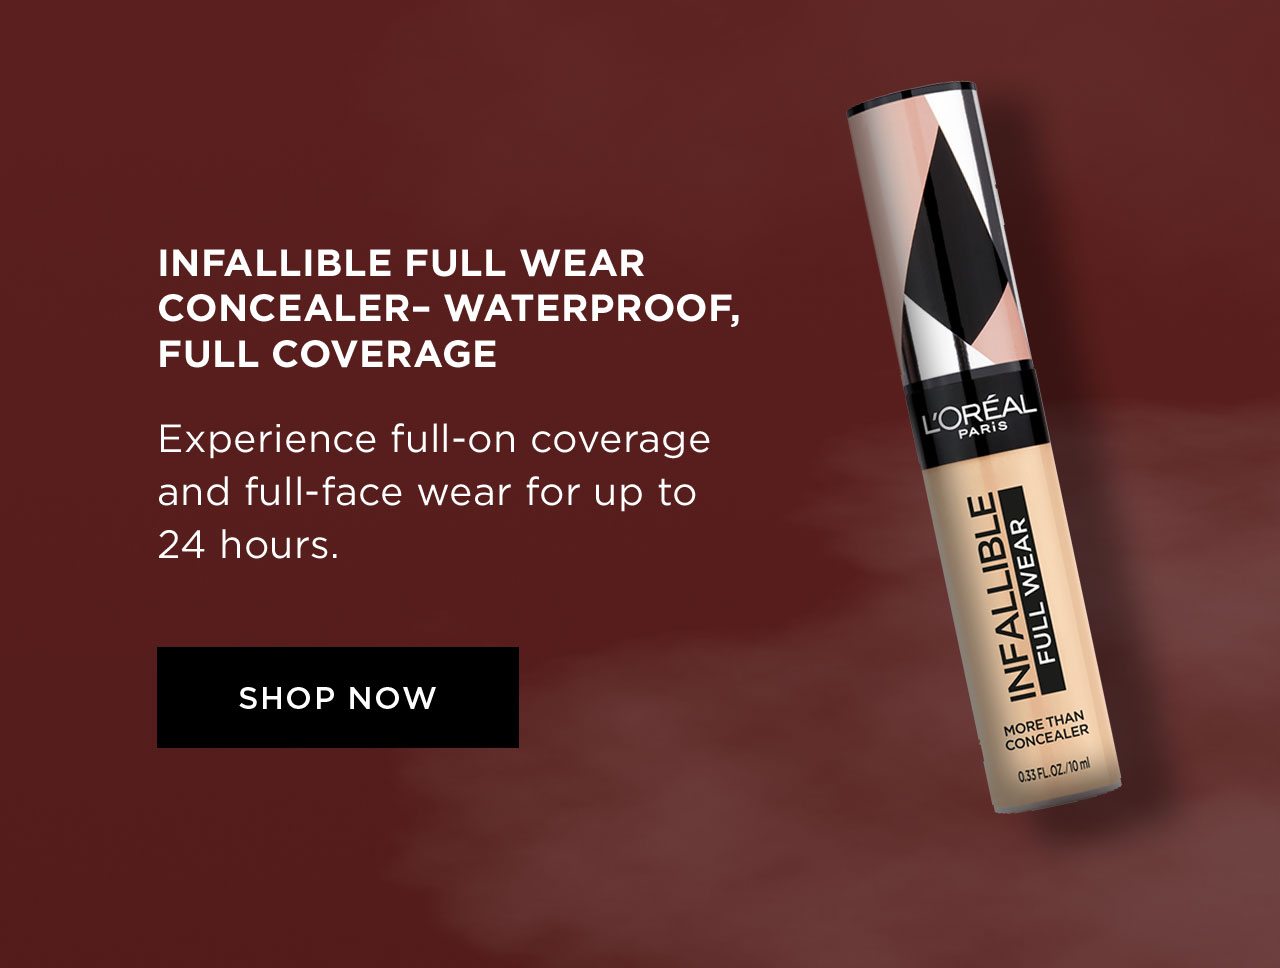 INFALLIBLE FULL WEAR CONCEALER-WATERPROOF, FULL COVERAGE - Experience full-on coverage and full-face wear for up to 24 hours. - SHOP NOW